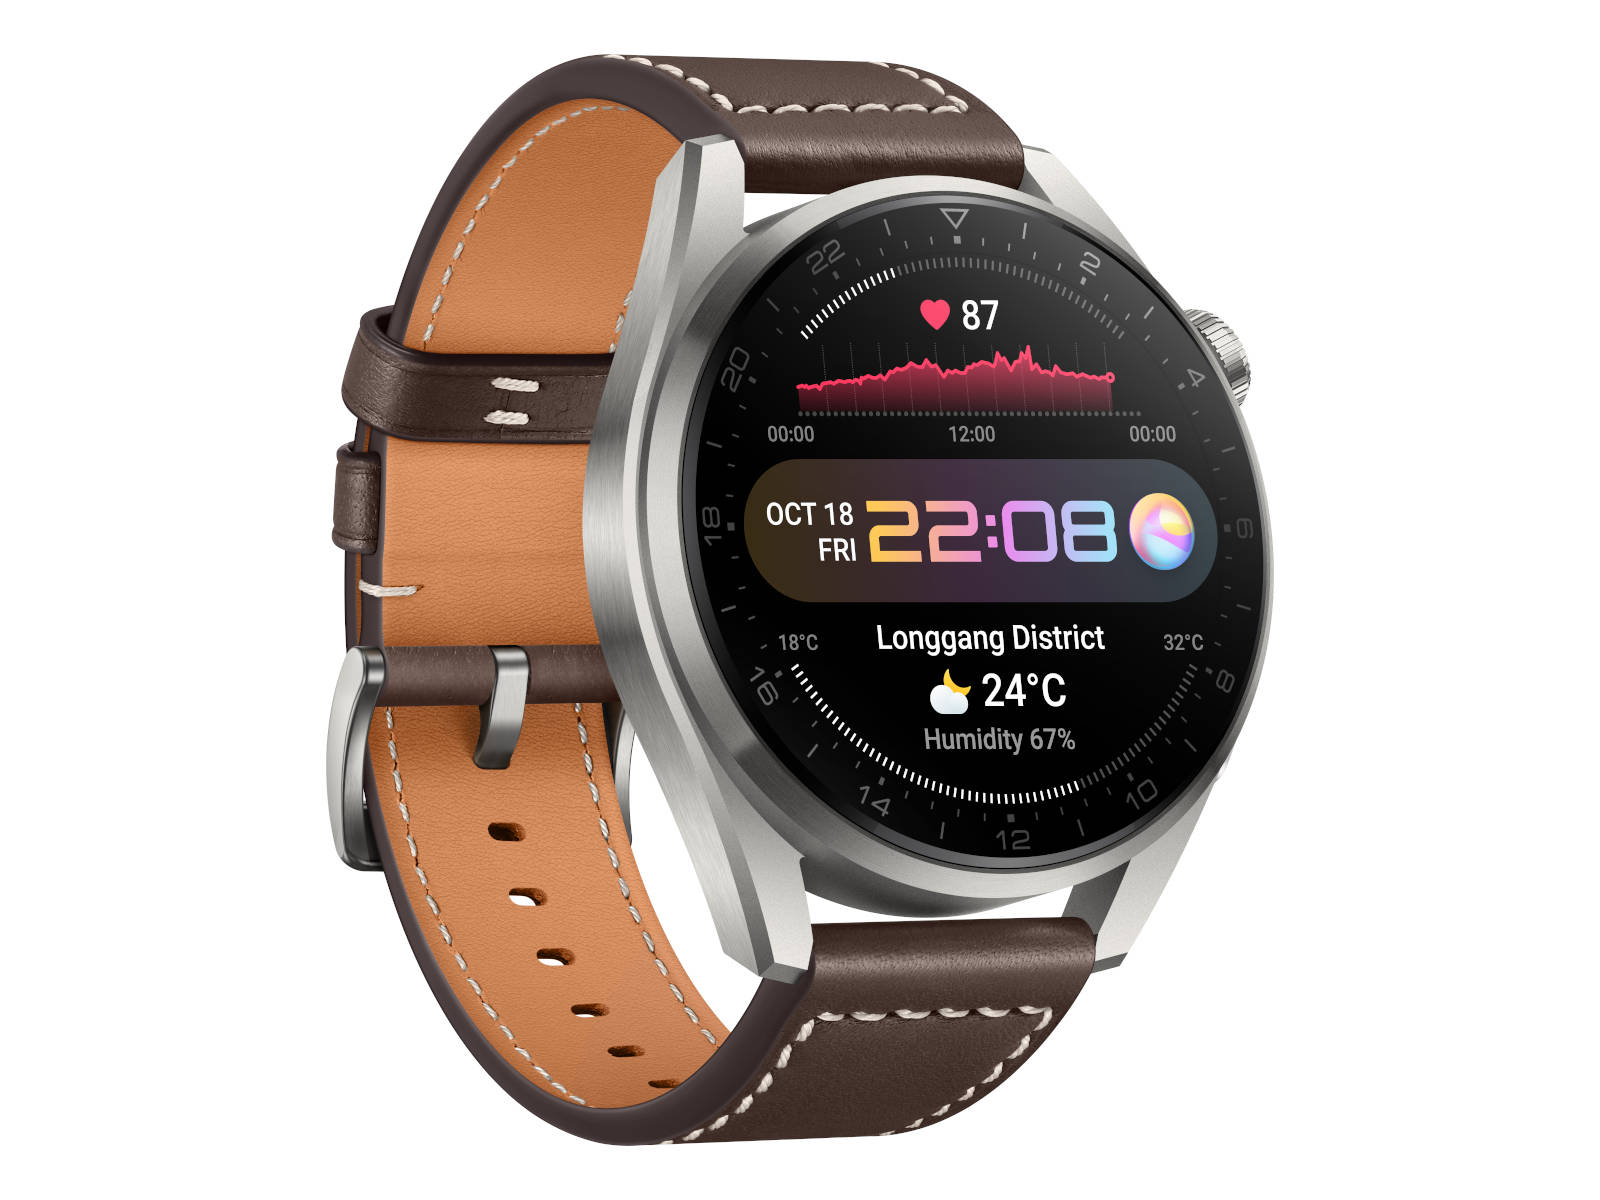 Huawei Explore 3 Official: The first smartwatch with Harmony OS in review